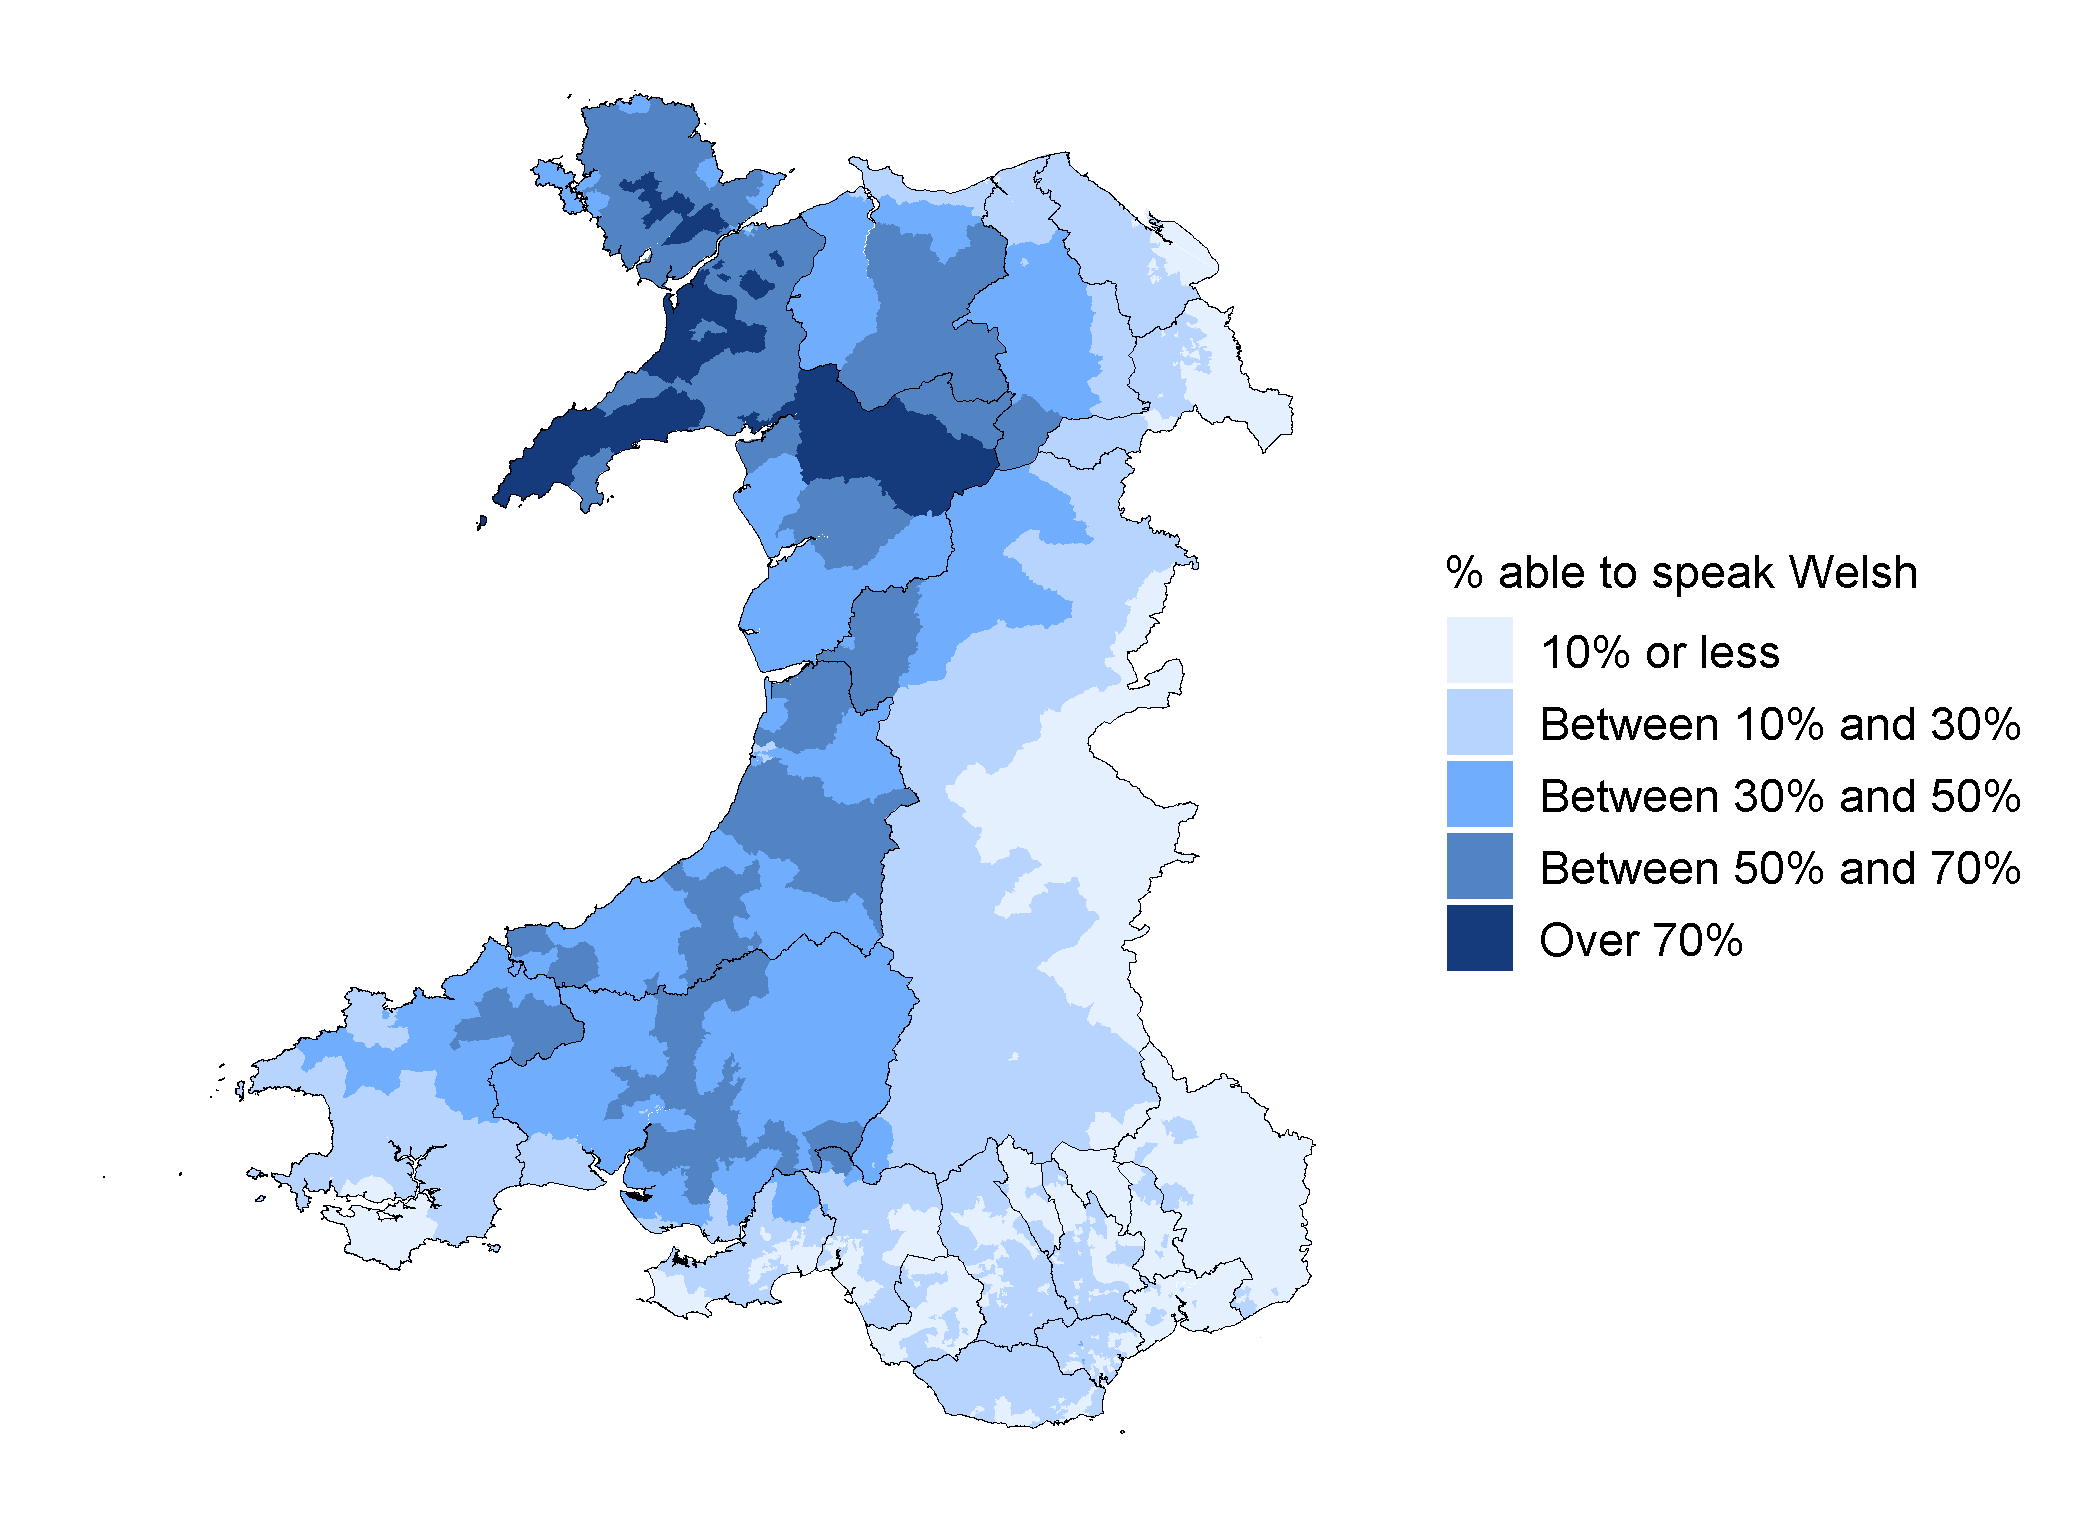 This map shows how the percentage of people aged three or older able to speak Welsh varies by small area known as LSOAs. Small areas where over 70% of their population were able to speak Welsh were in north west Wales whereas most small areas where 10% or less of their population were able to speak Welsh were in south east Wales.